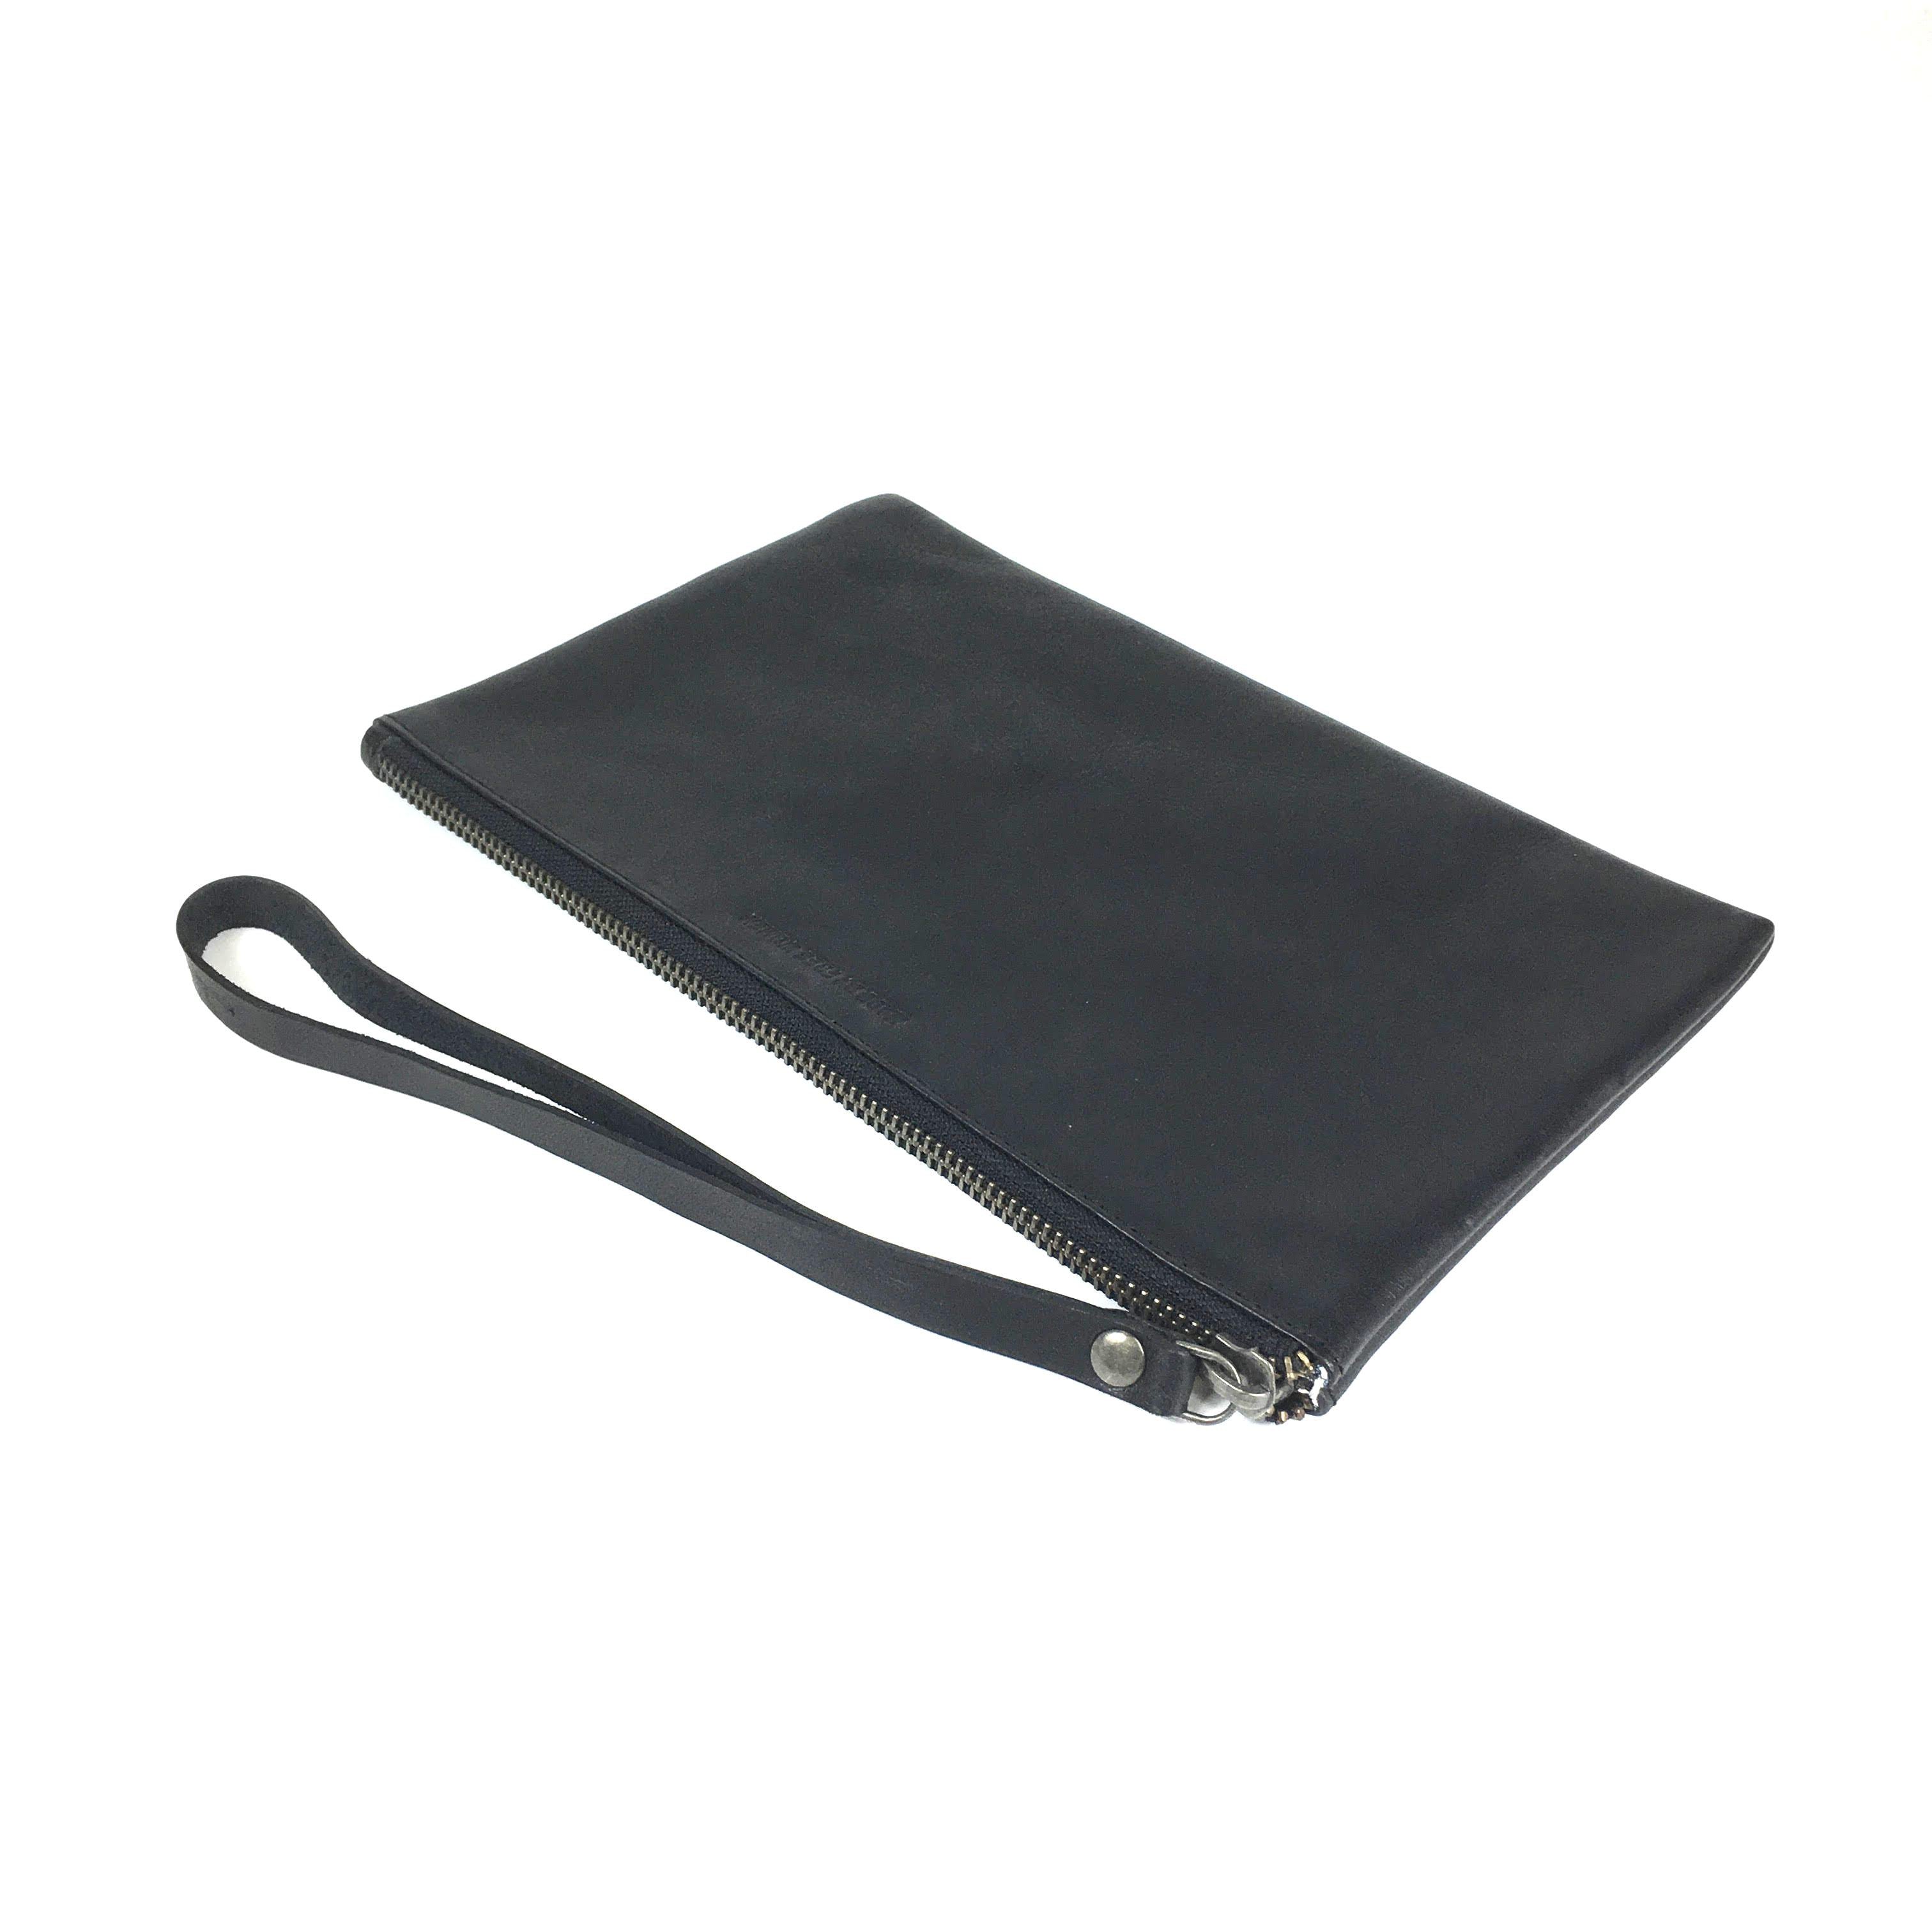 LEATHER CLUTCH BLACK Clutches Made Free 